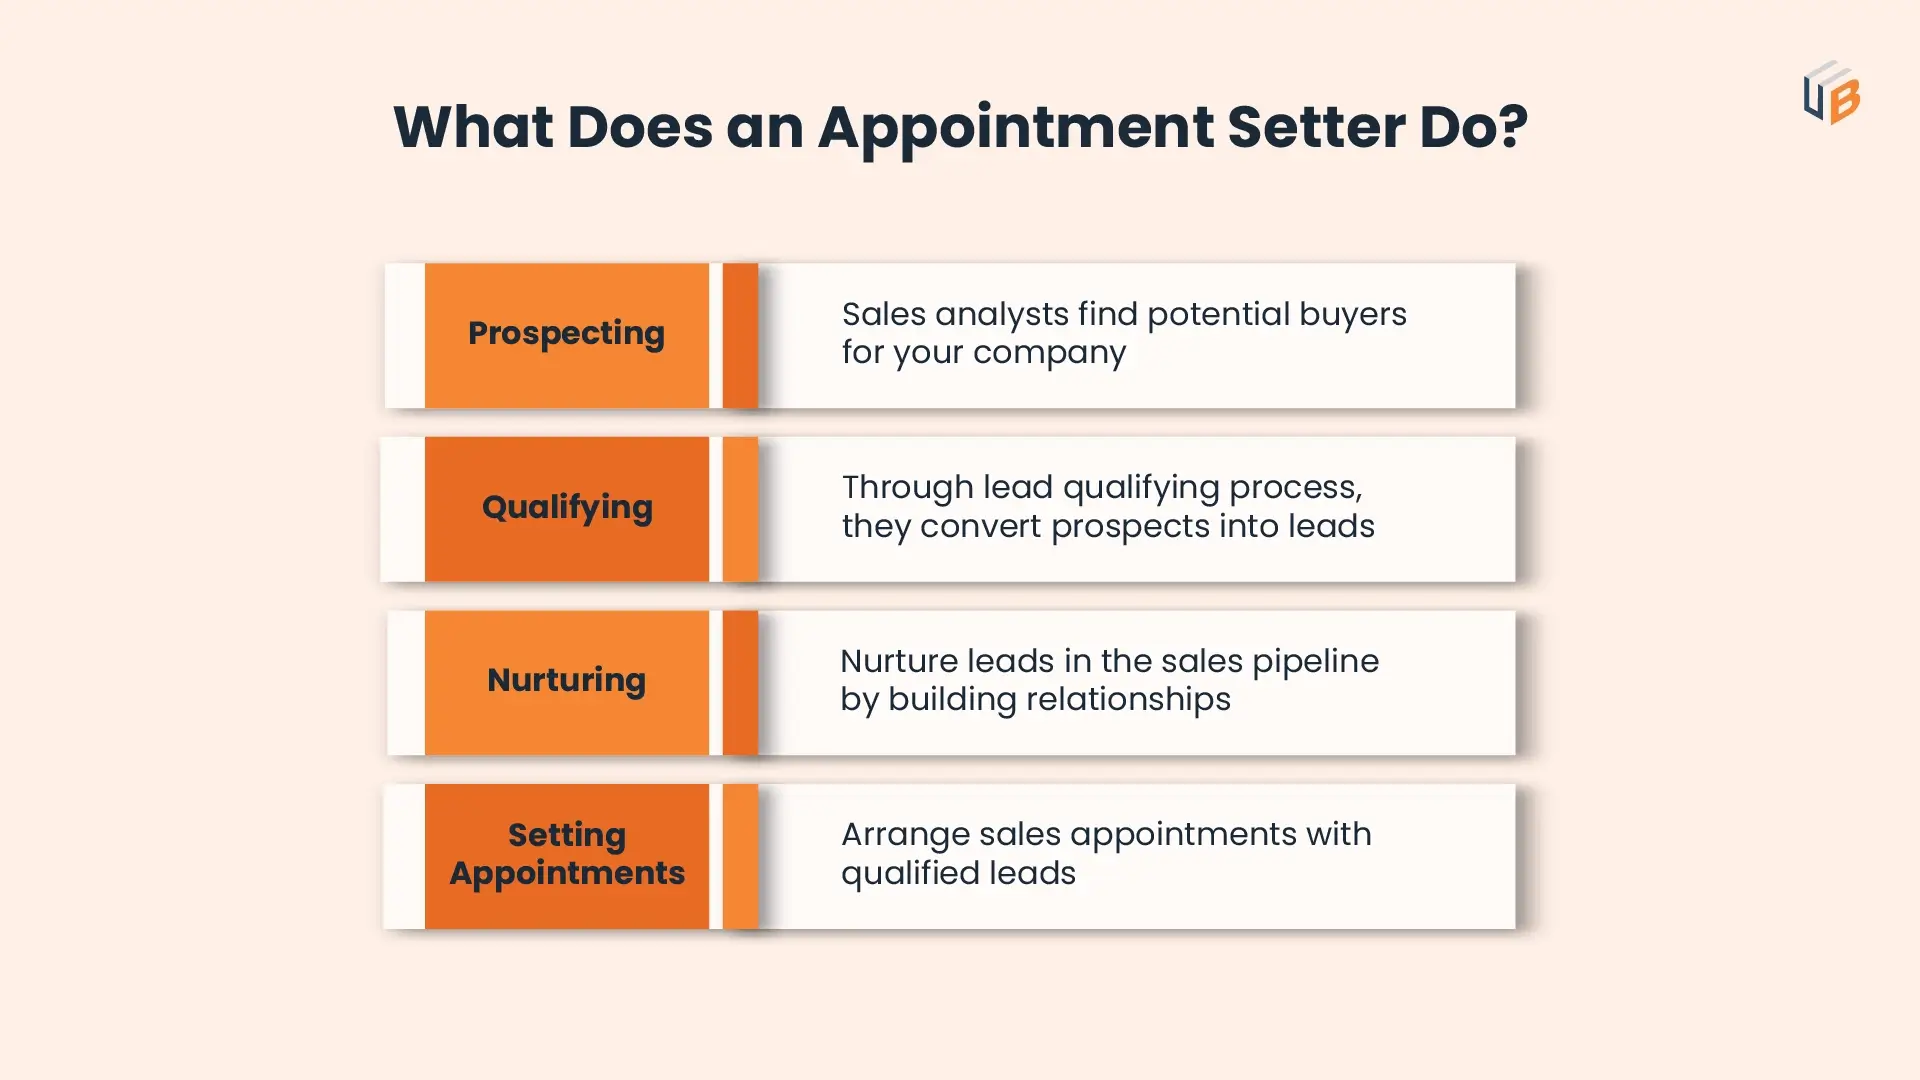 What Does an Appointment Setter Do?